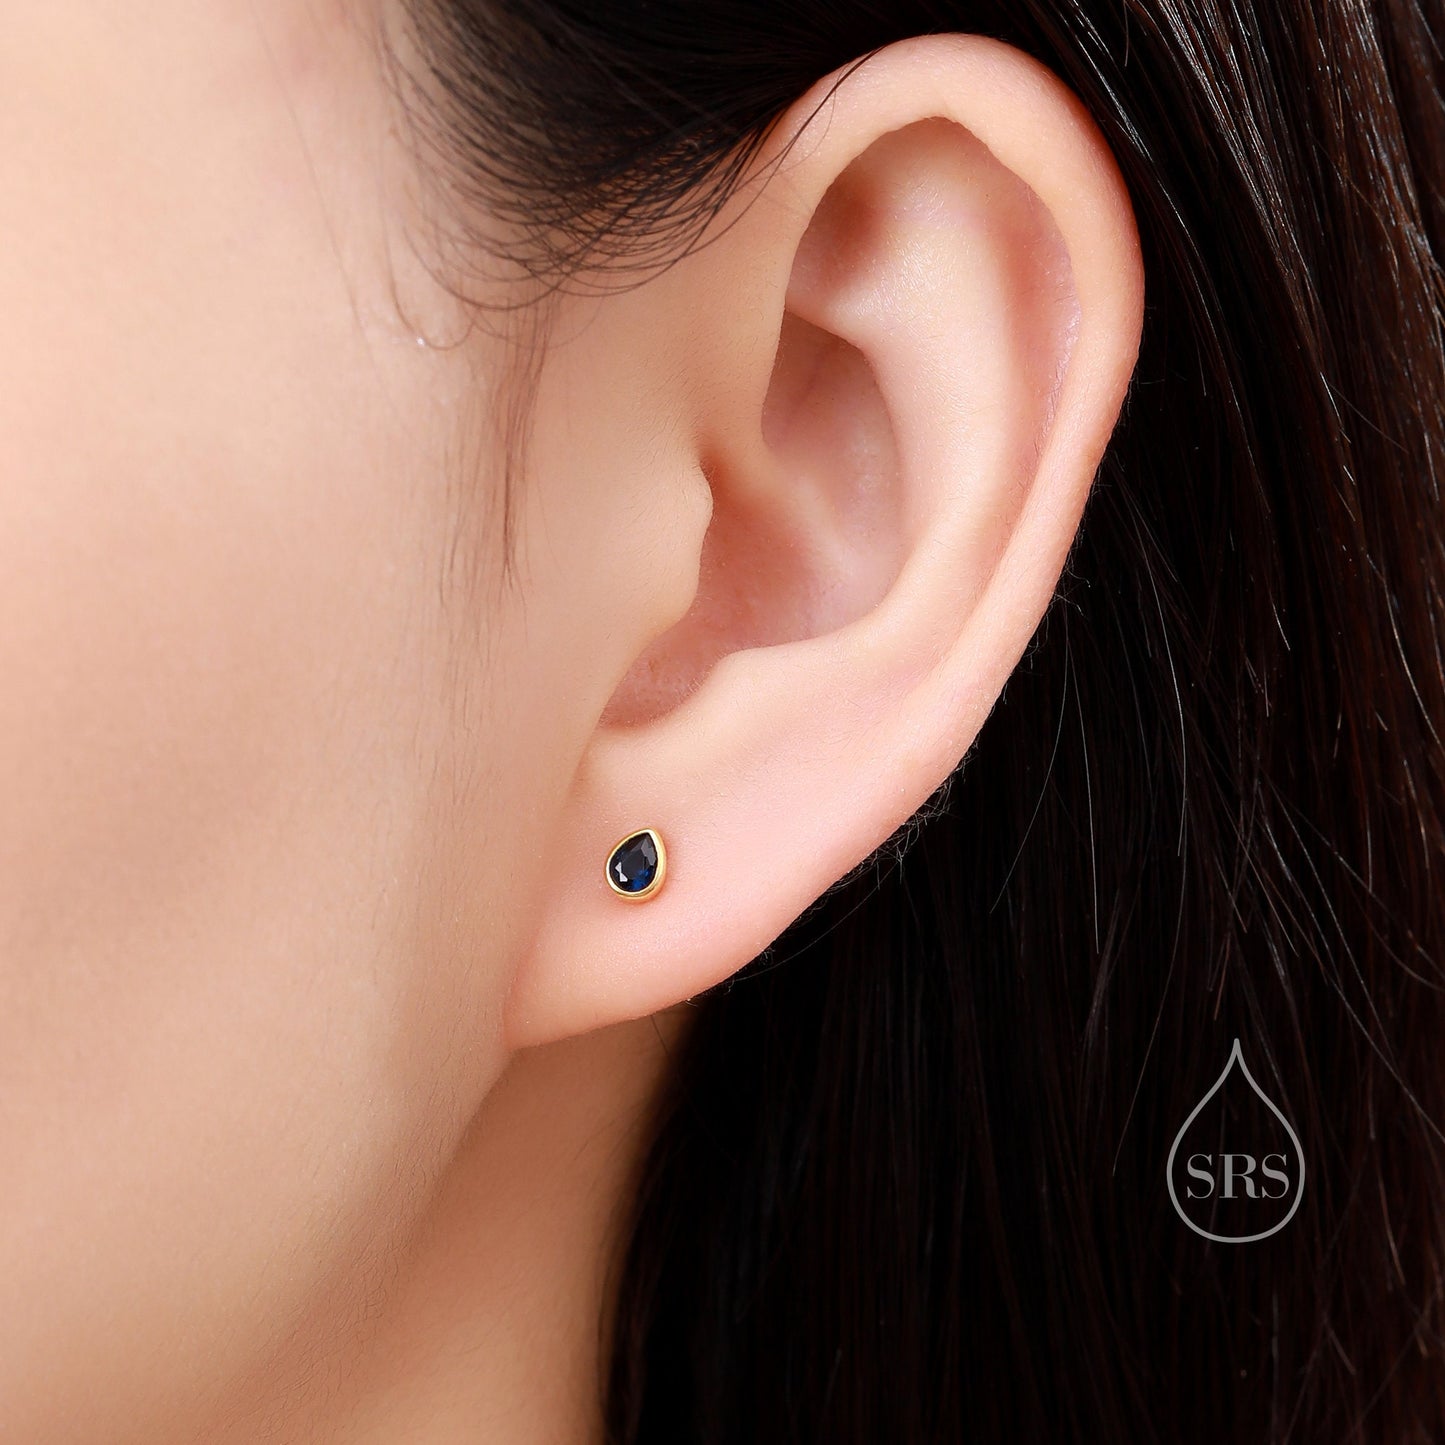 Extra Tiny Black CZ Droplet Stud Earrings in Sterling Silver, Silver or Gold, Black CZ Stud Earrings